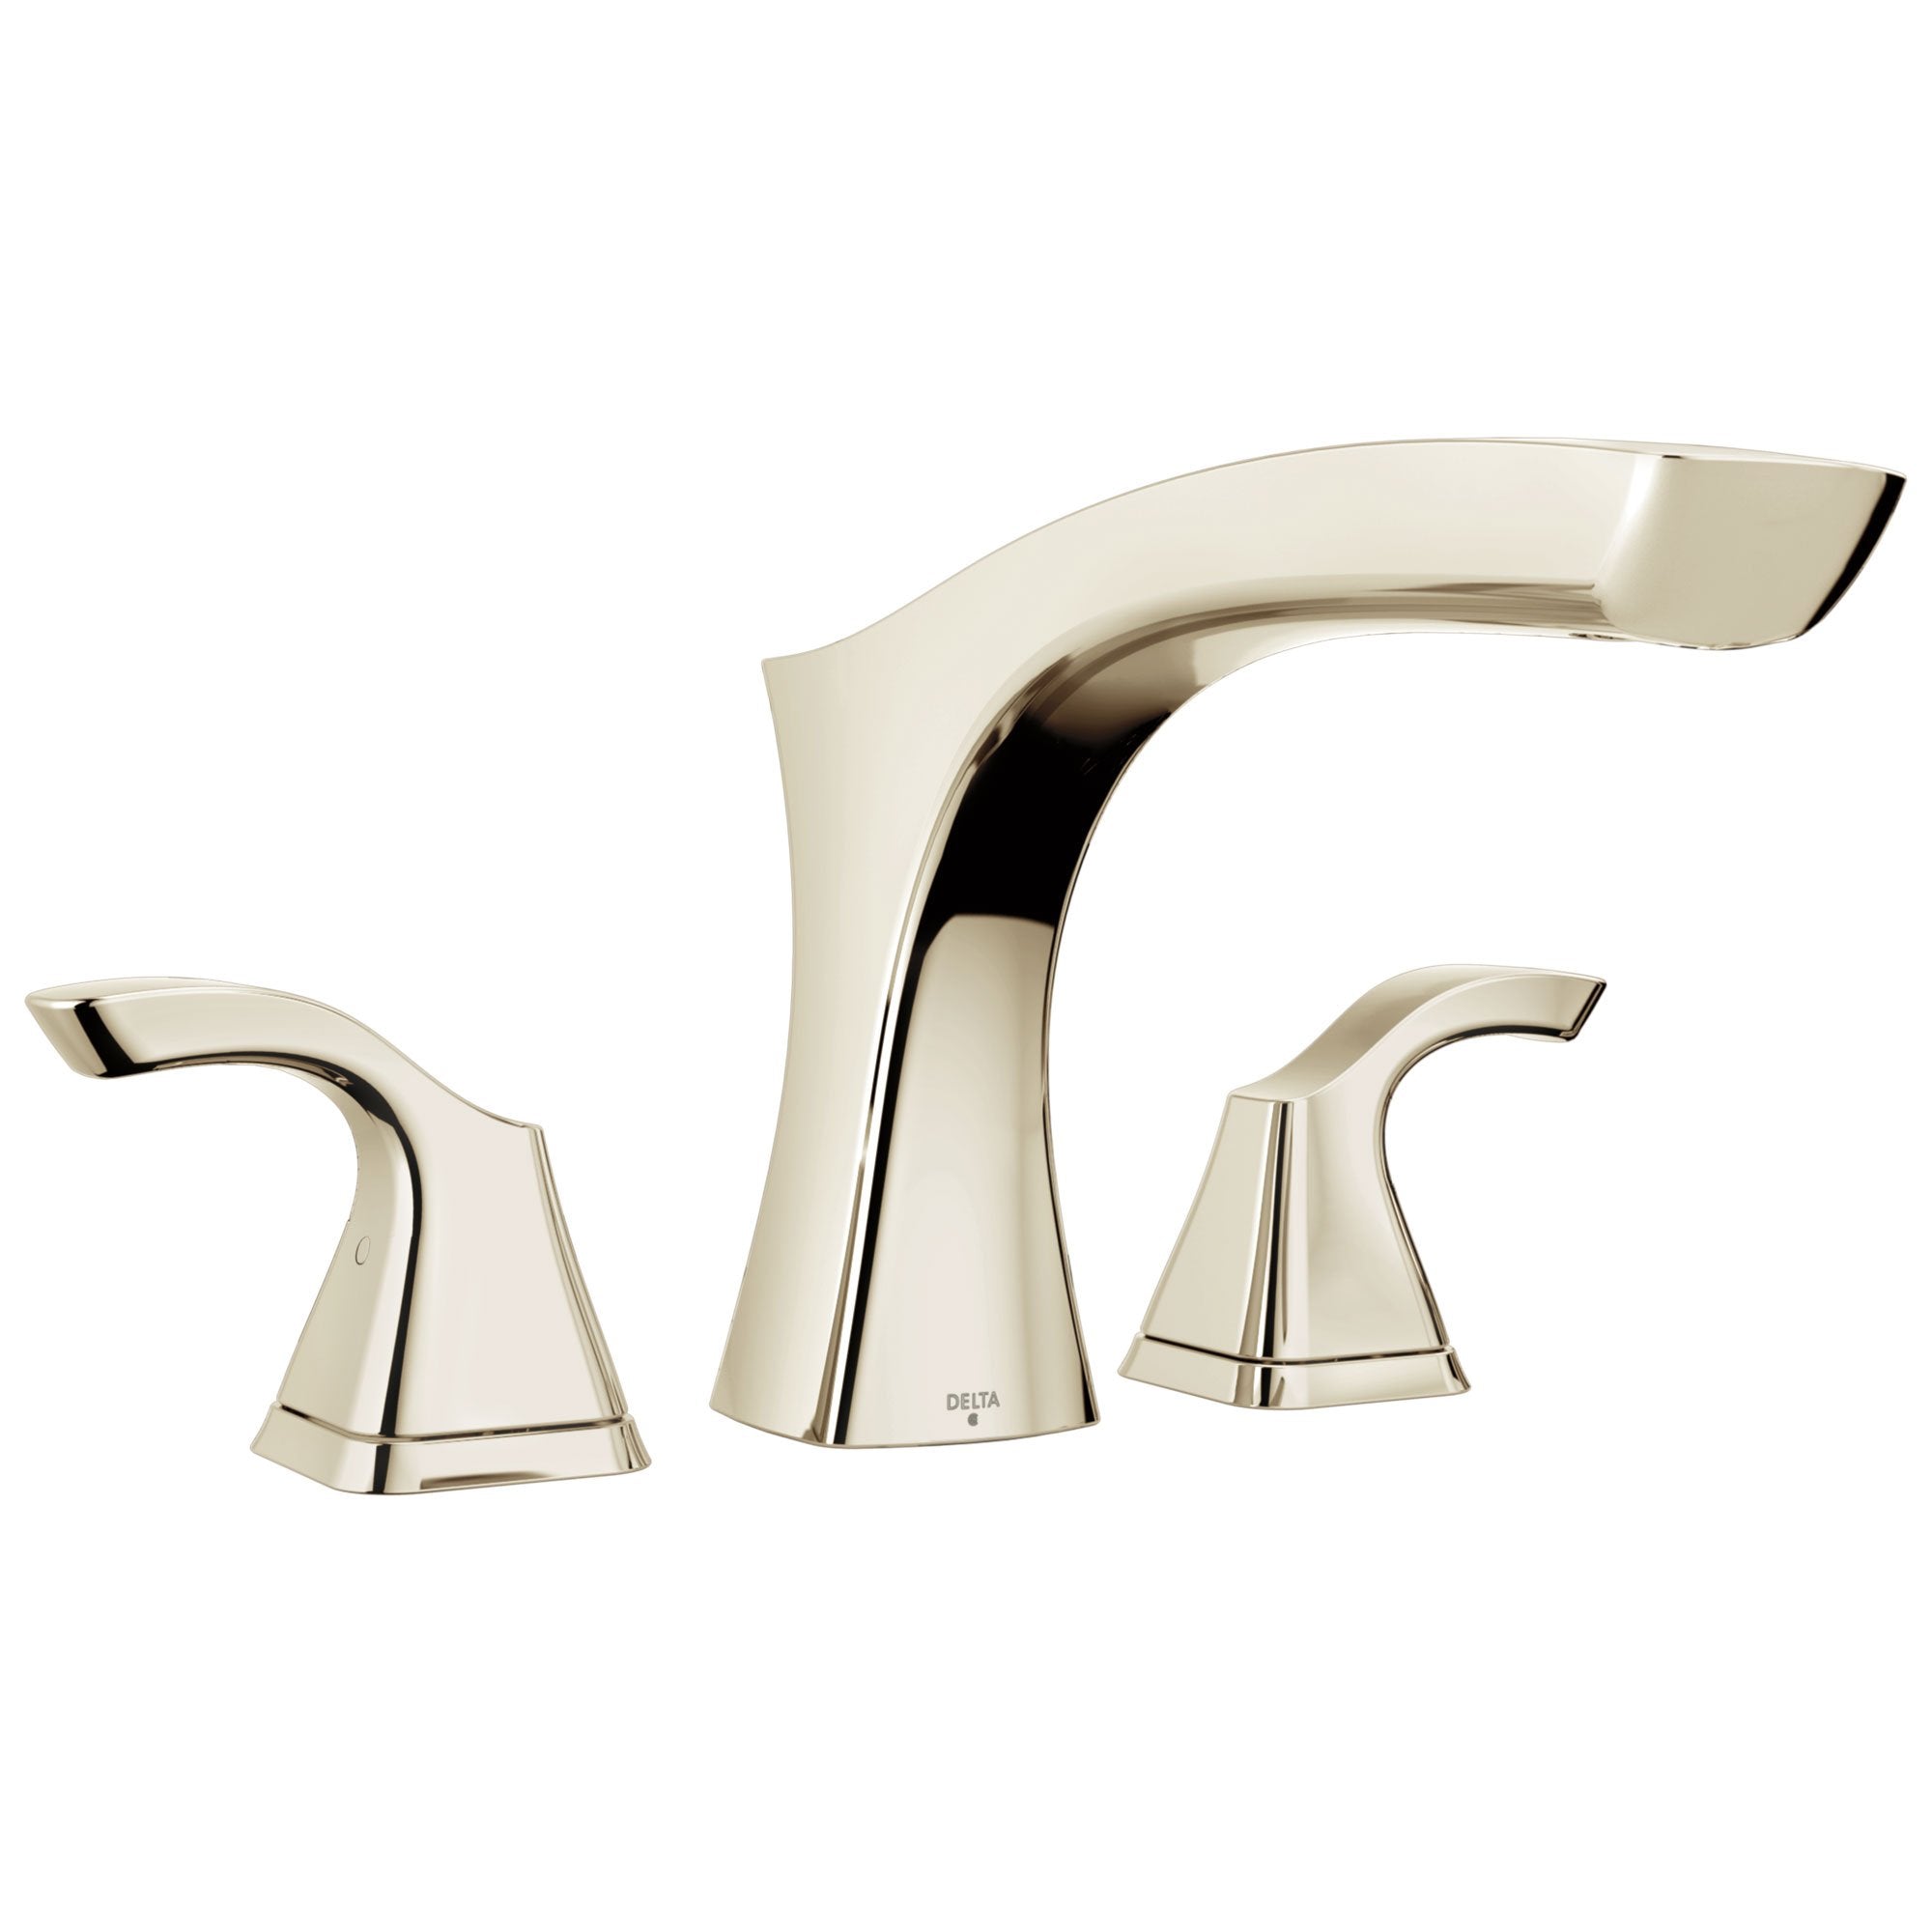 Delta Tesla Collection Polished Nickel Finish Modern Widespread Roman Tub Filler Faucet Includes Trim Kit and Rough-in Valve D1918V